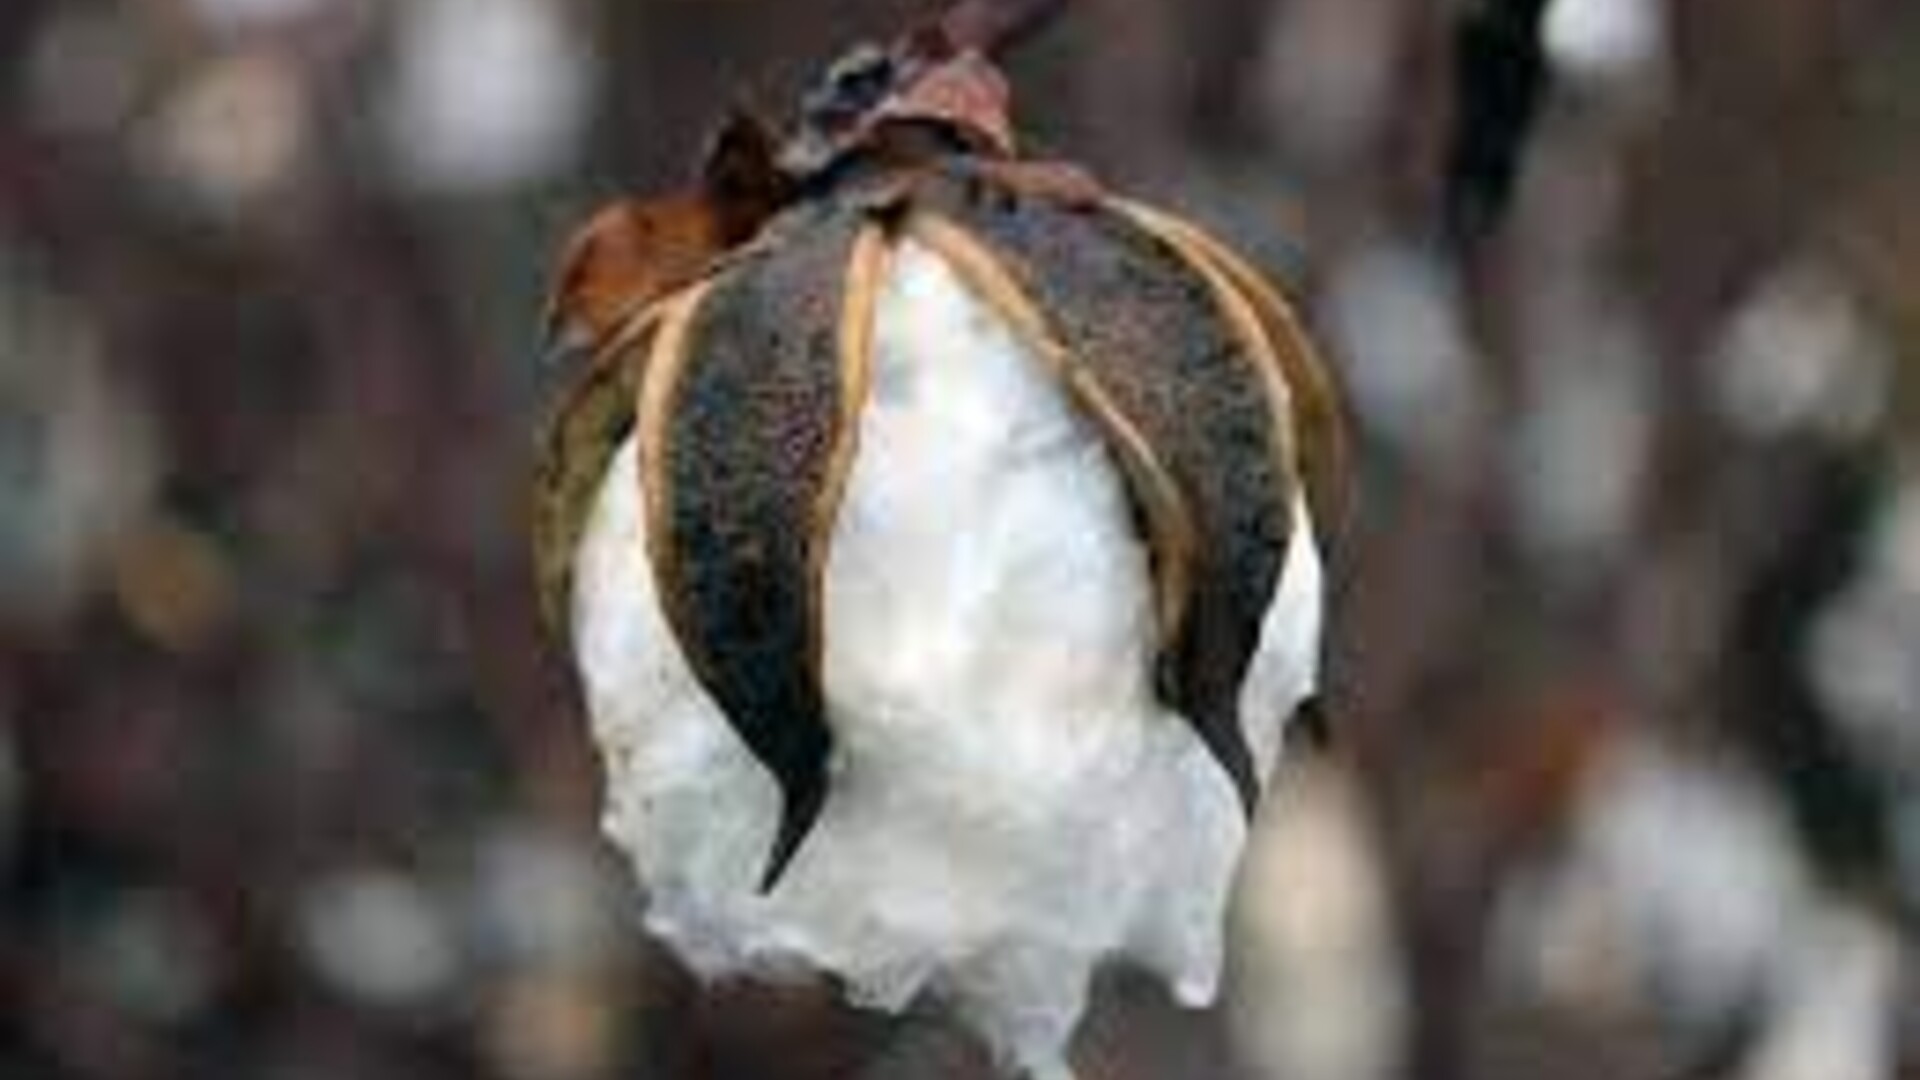 Cotton and Peanuts Slow but Healthy